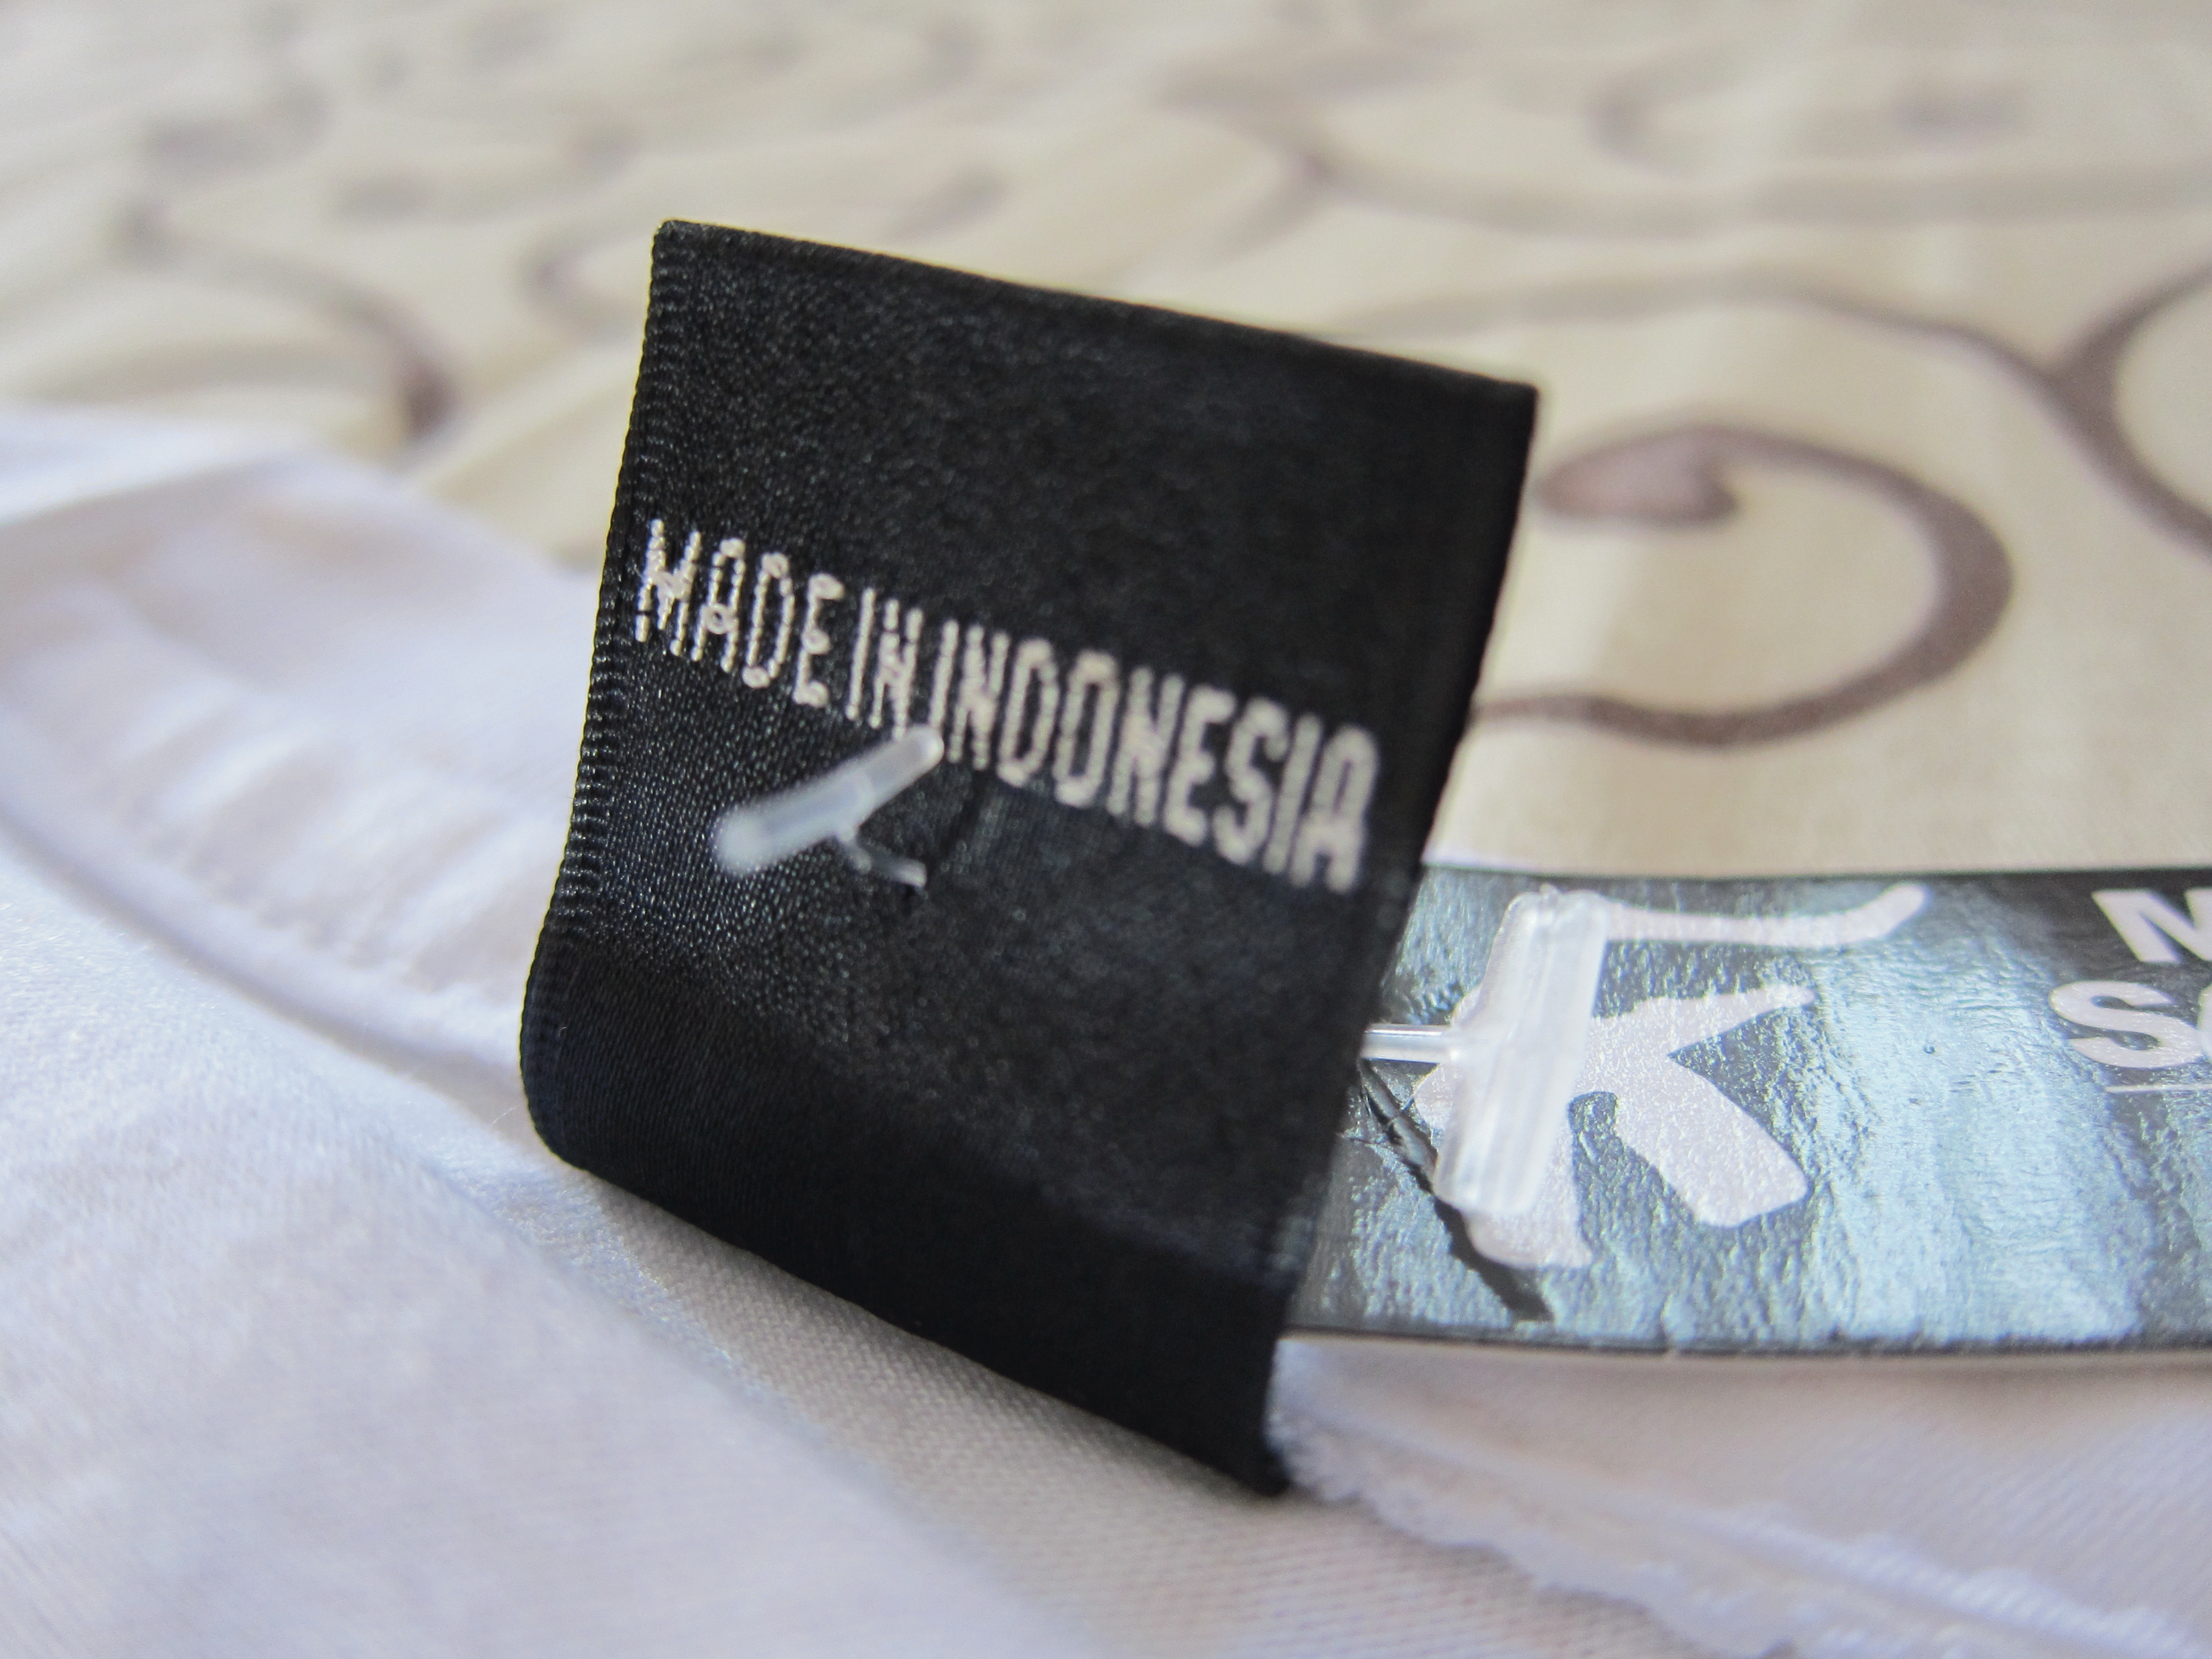 Indonesian Products